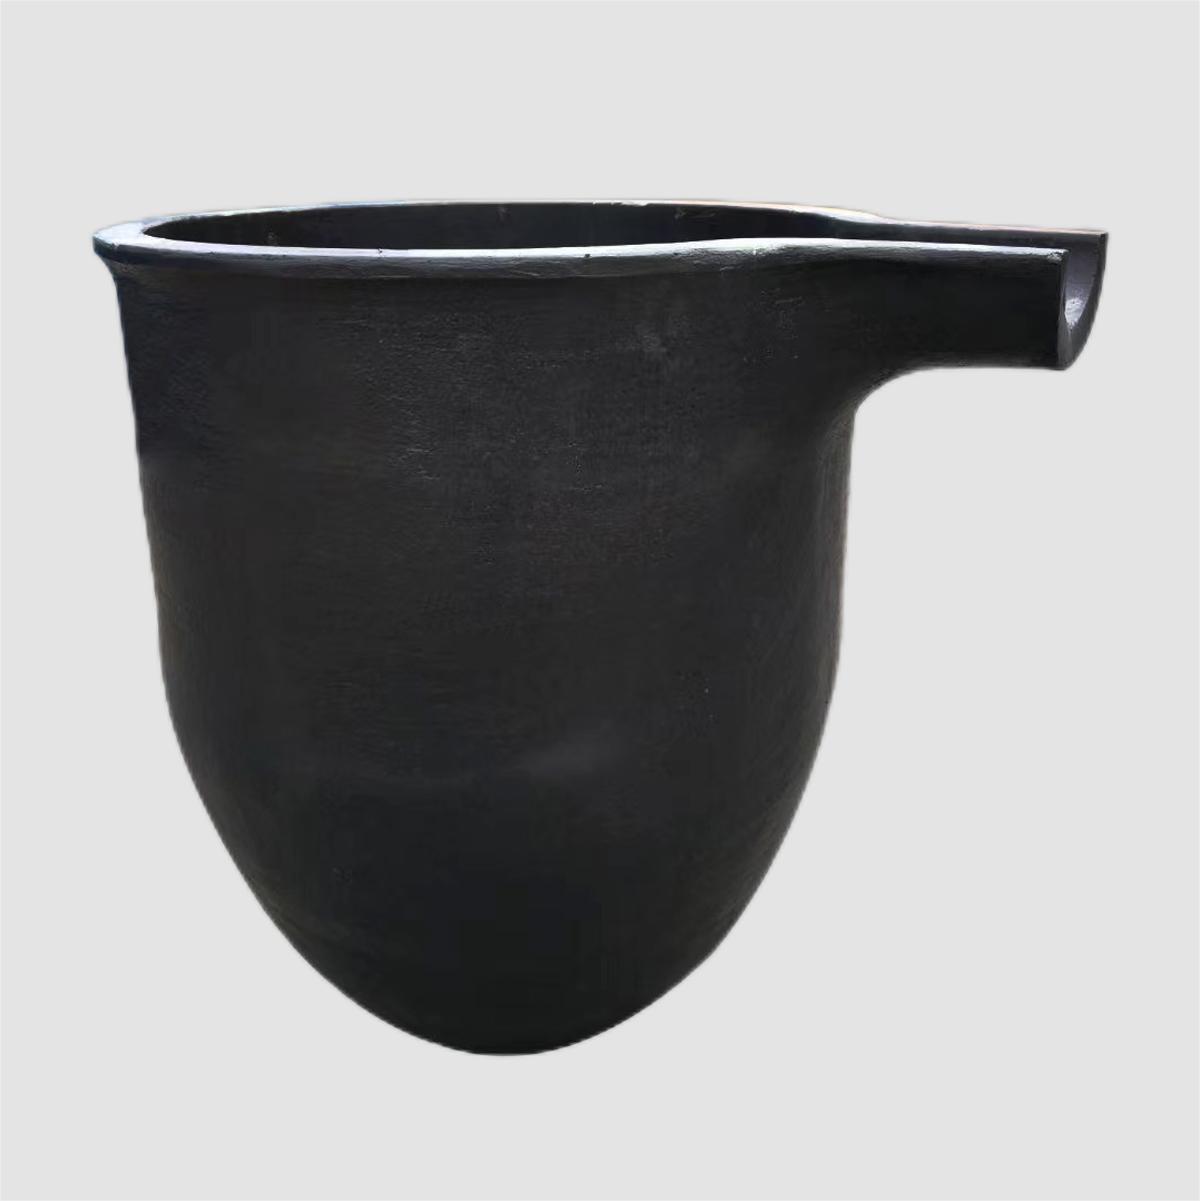 High Quality Graphite Crucible, For Industrial at Rs 990/piece in